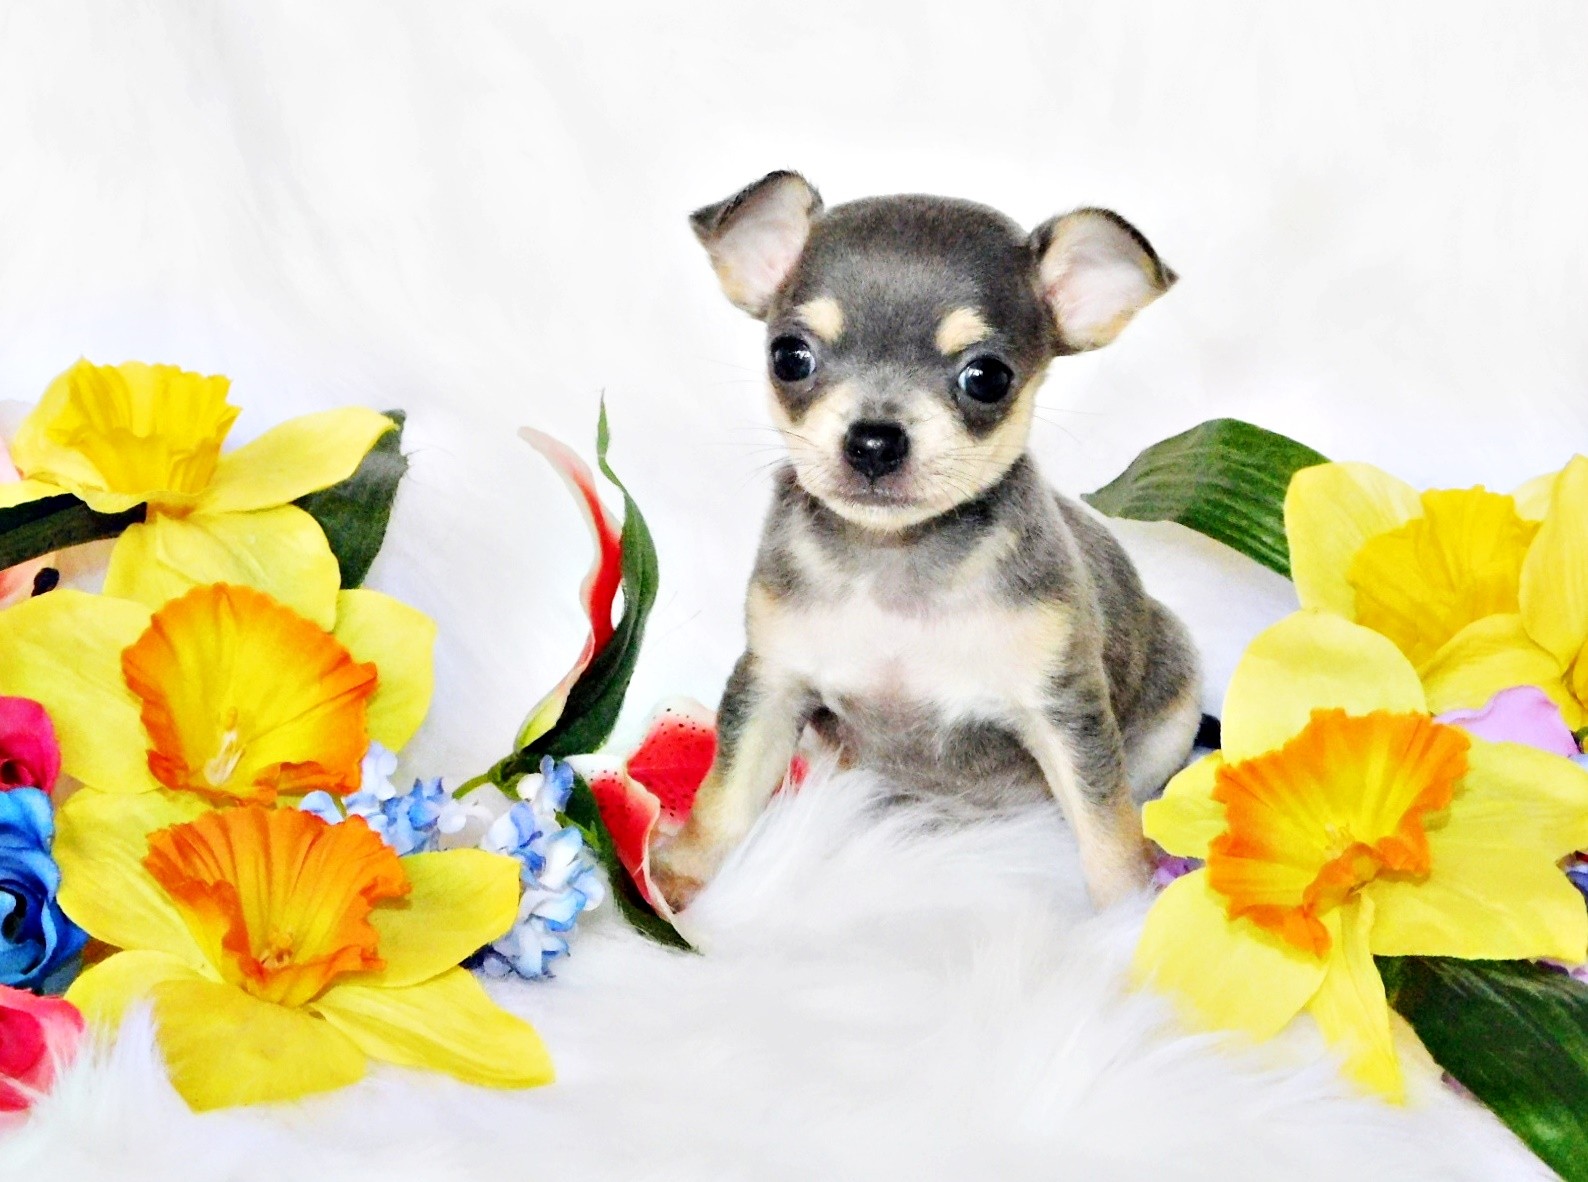 Chihuahuas are not just pets, they are our passion at ChiChiBabies.  We work to ensure that every Chihuahua puppy makes a wonderful pet for you.  